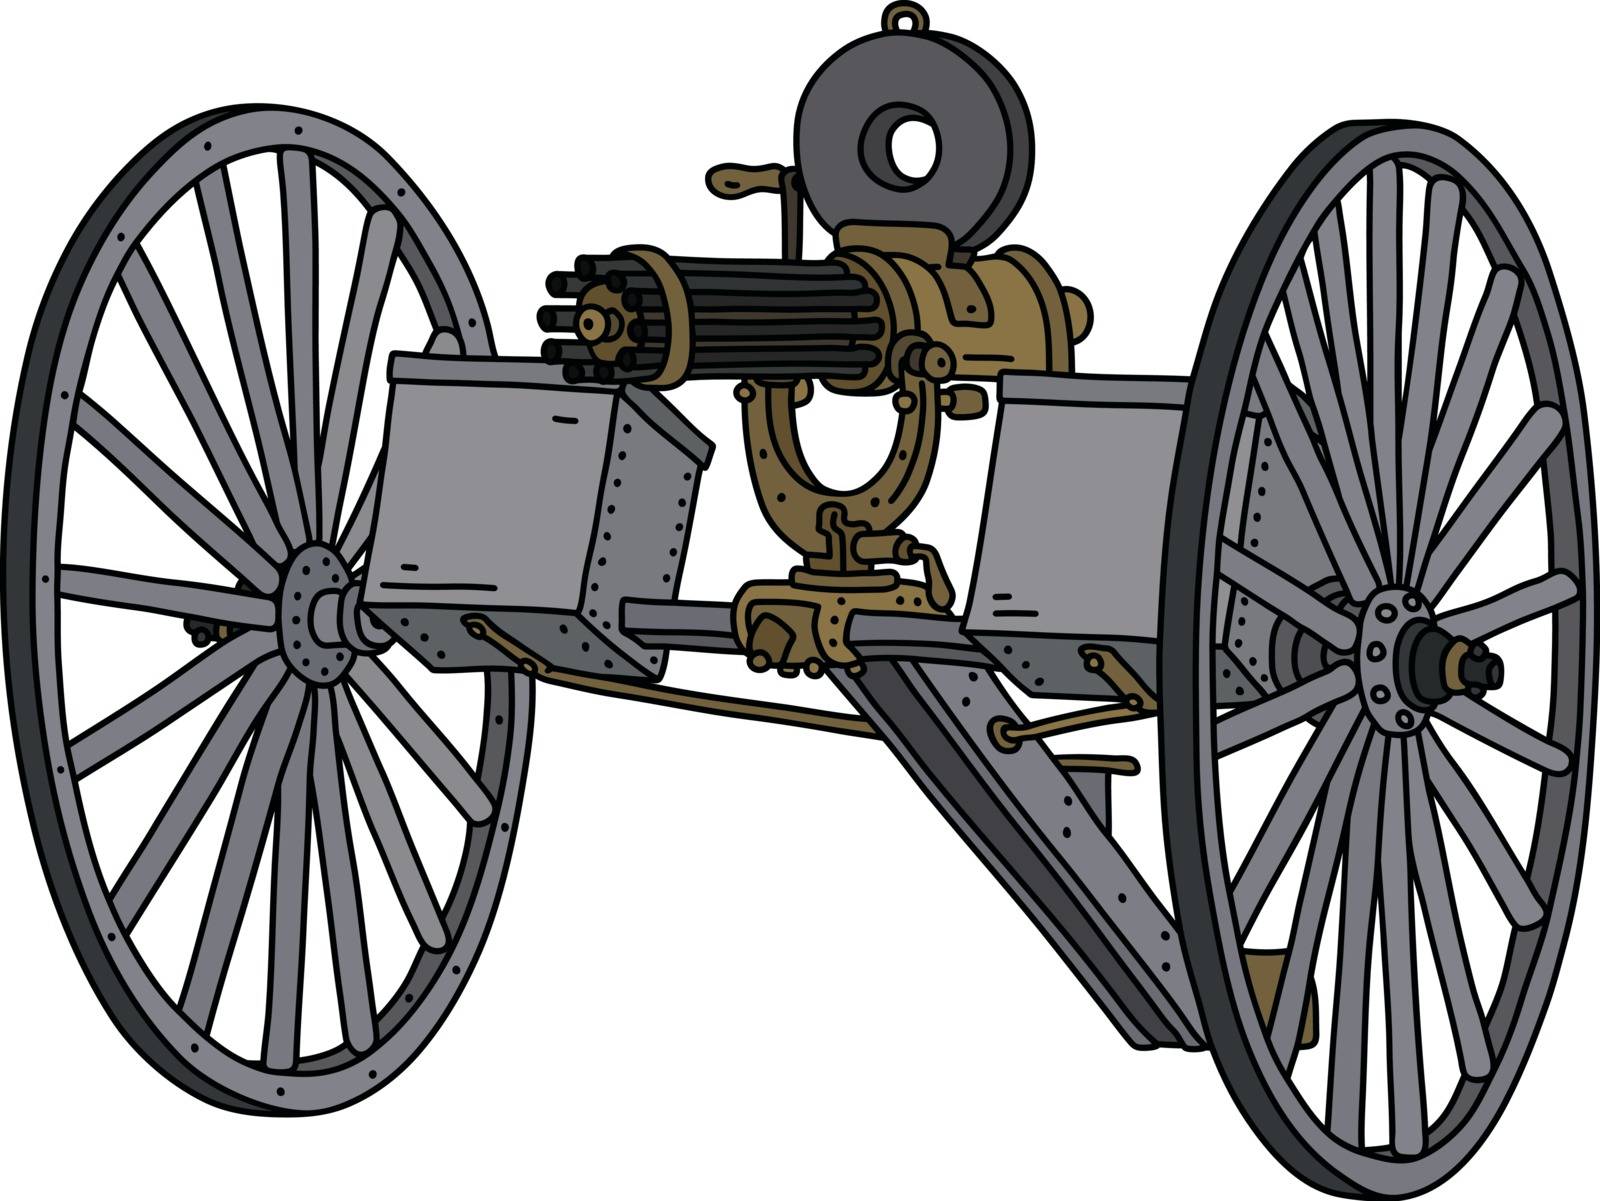 The vectorized hand drawing of an old Gatling multi barrel machine gun